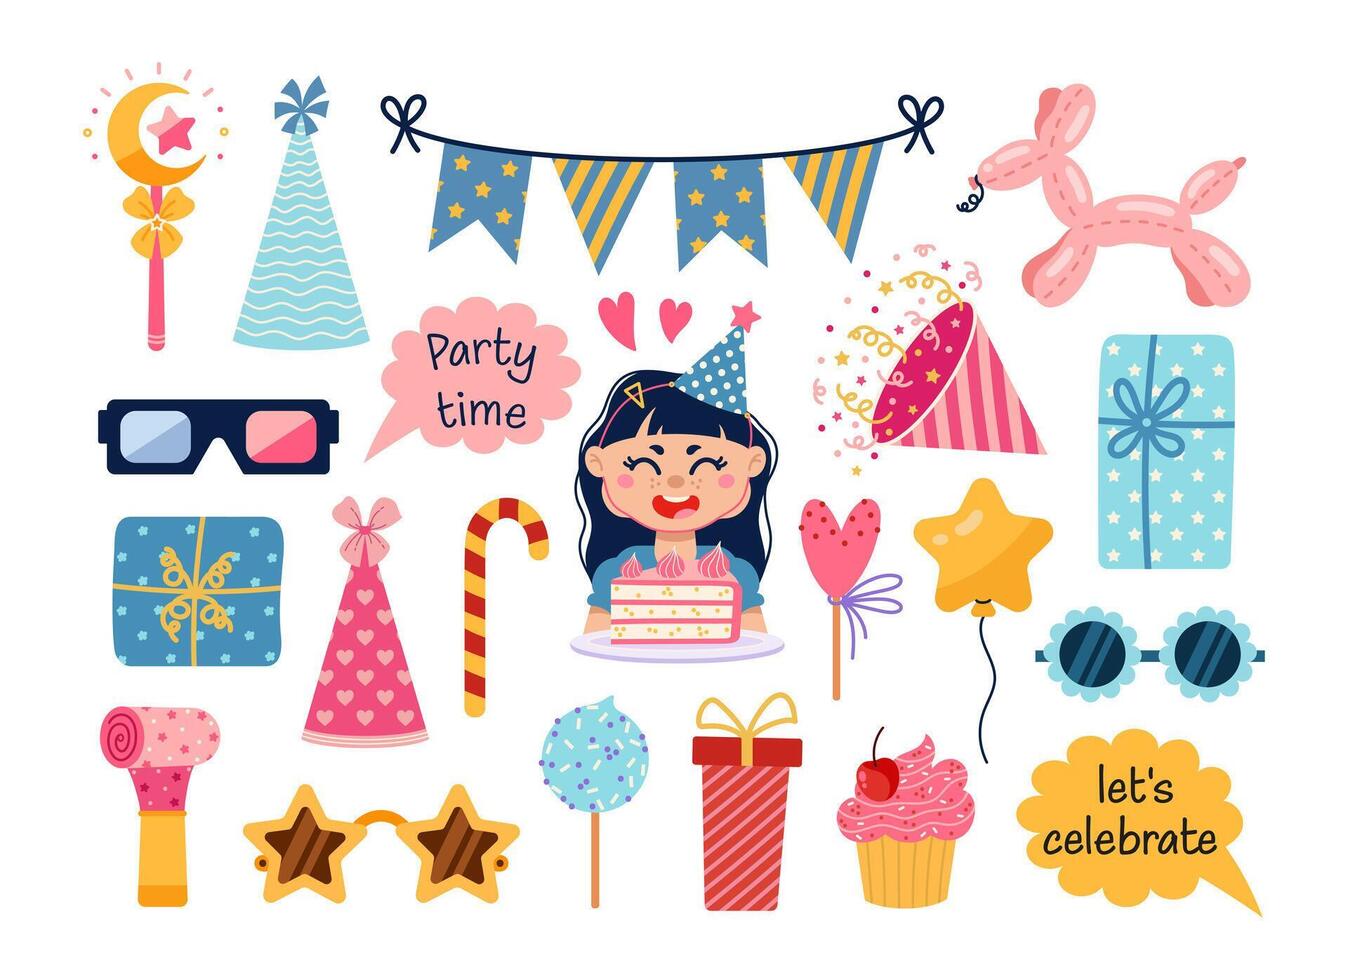 Birthday vector set. Cute smiling girl with a cake. Festive elements - firecracker, funny glasses, whistle, party hat, gift, balloon. Surprise for a kid, holiday celebration. Flat cartoon clipart